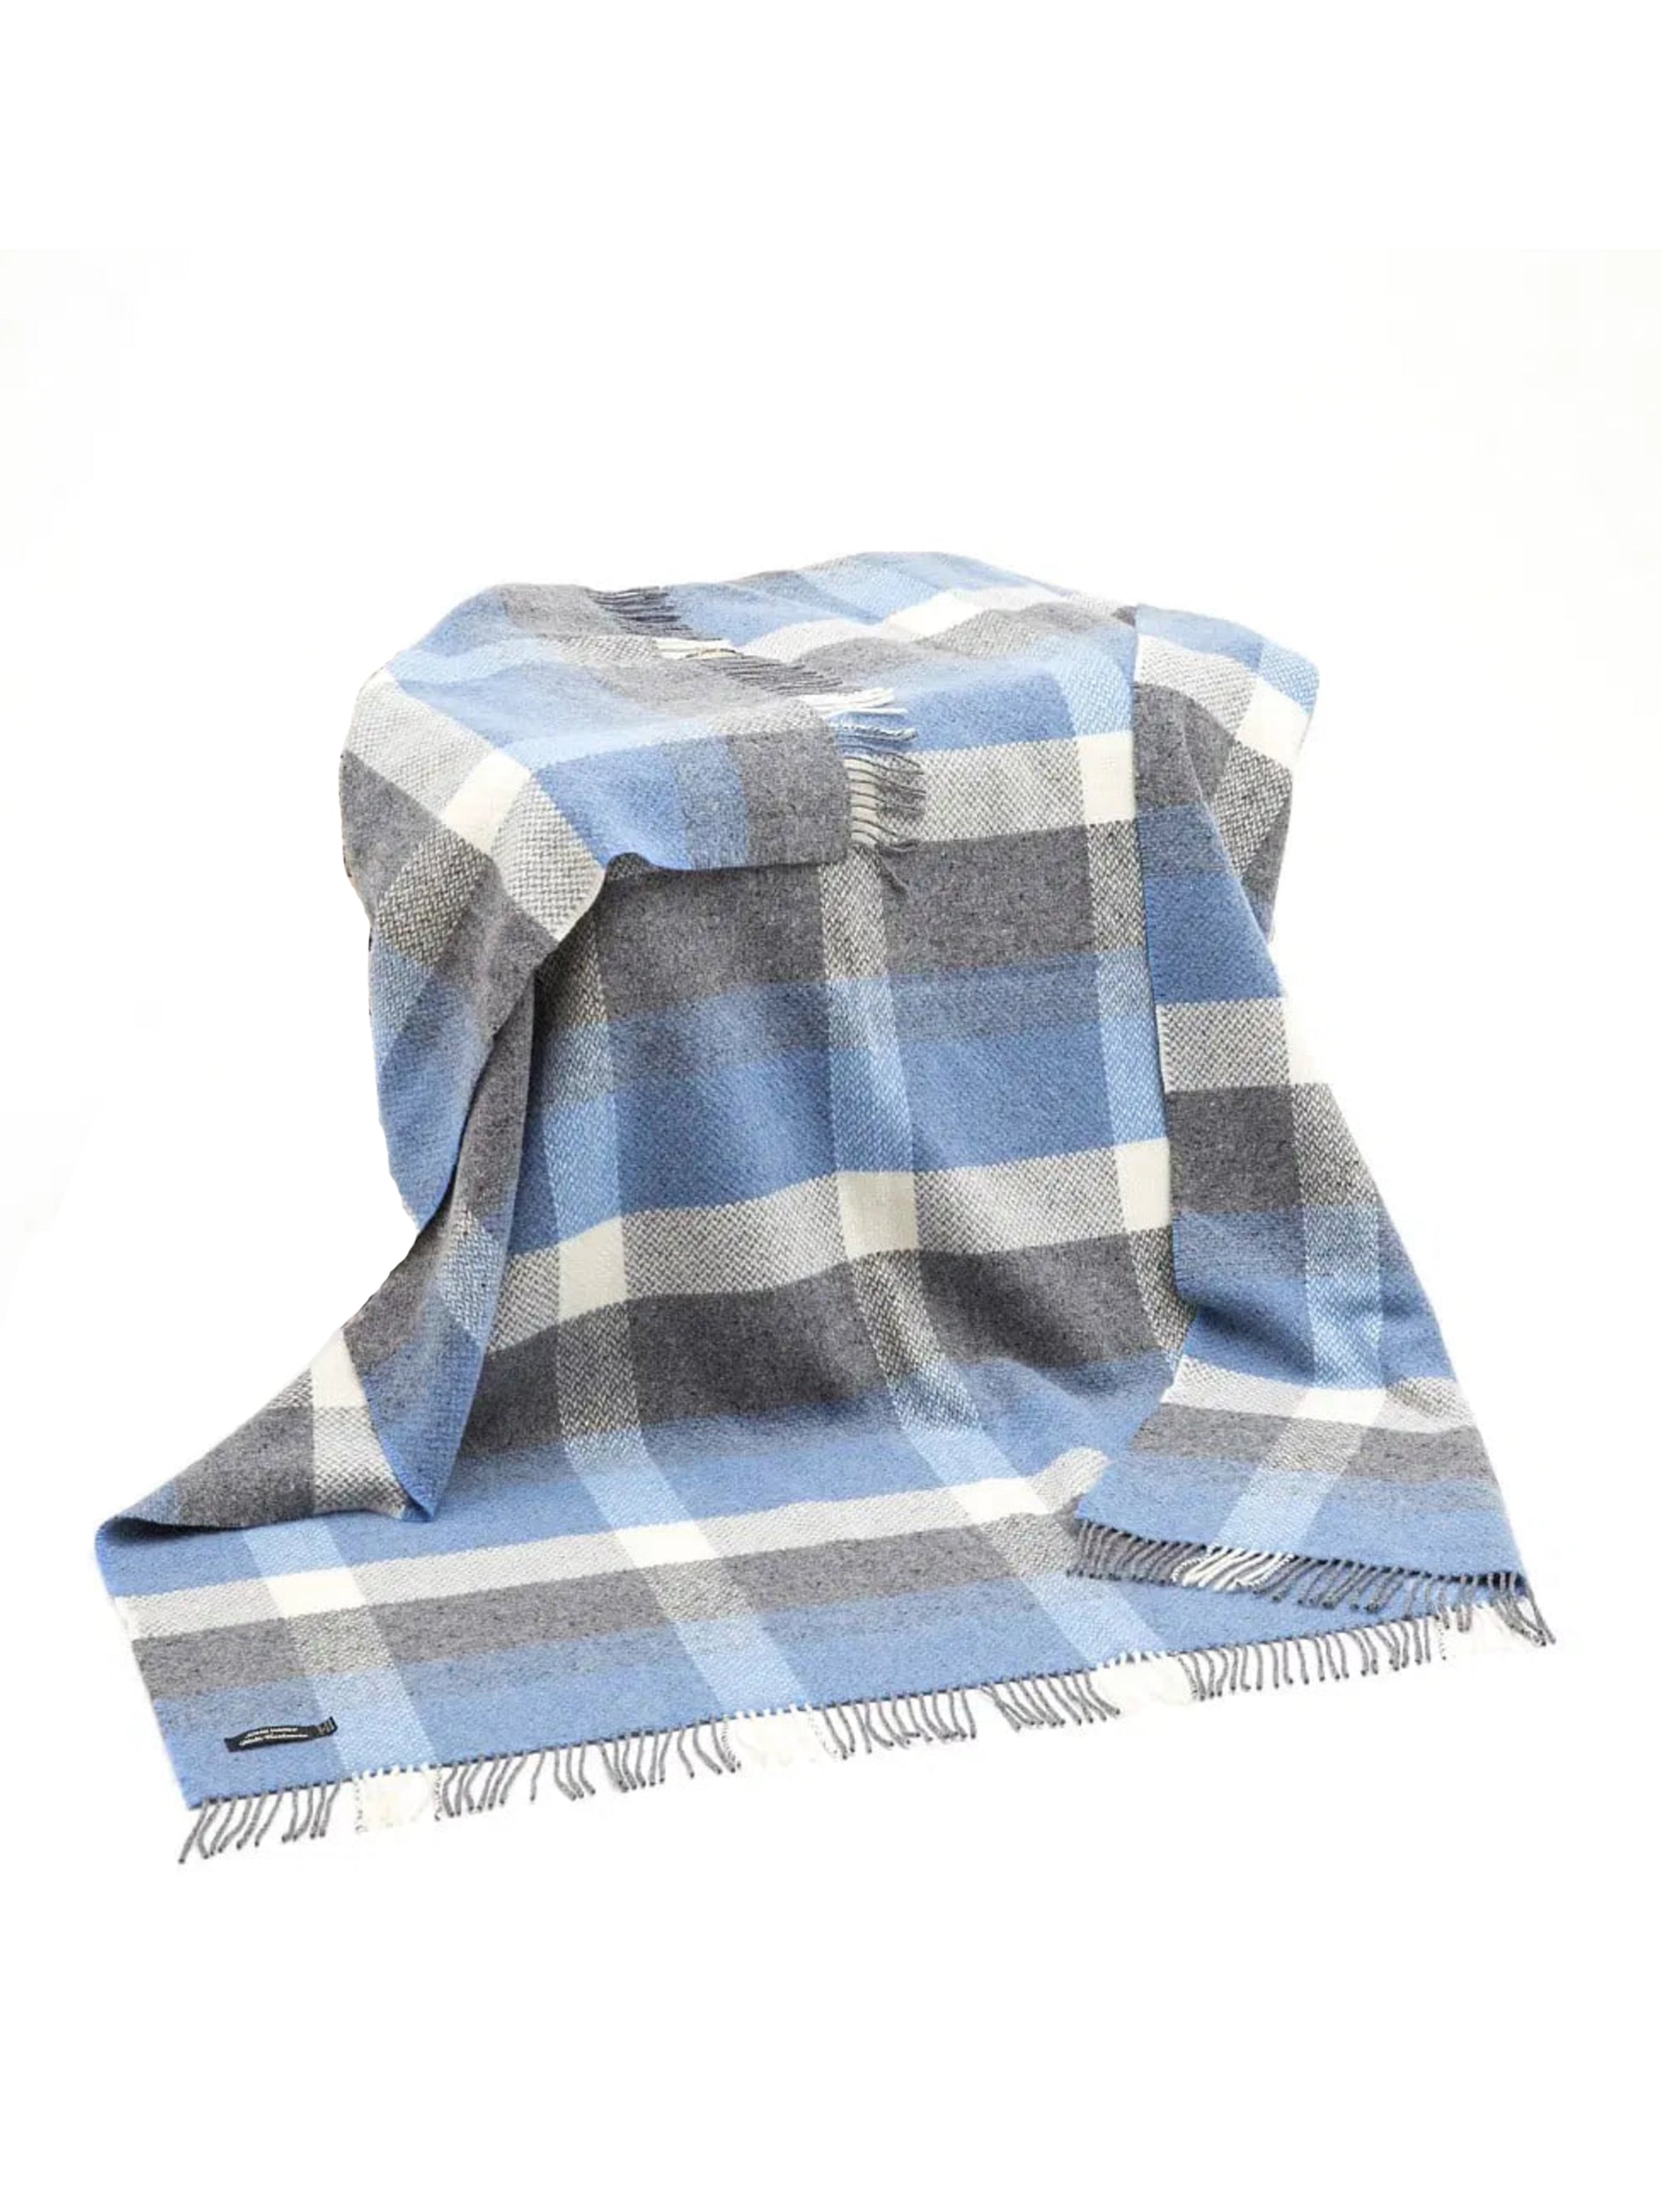 John Hanly Cashmere and Wool Throw Denim Cream & Pale Grey Check Weston Table